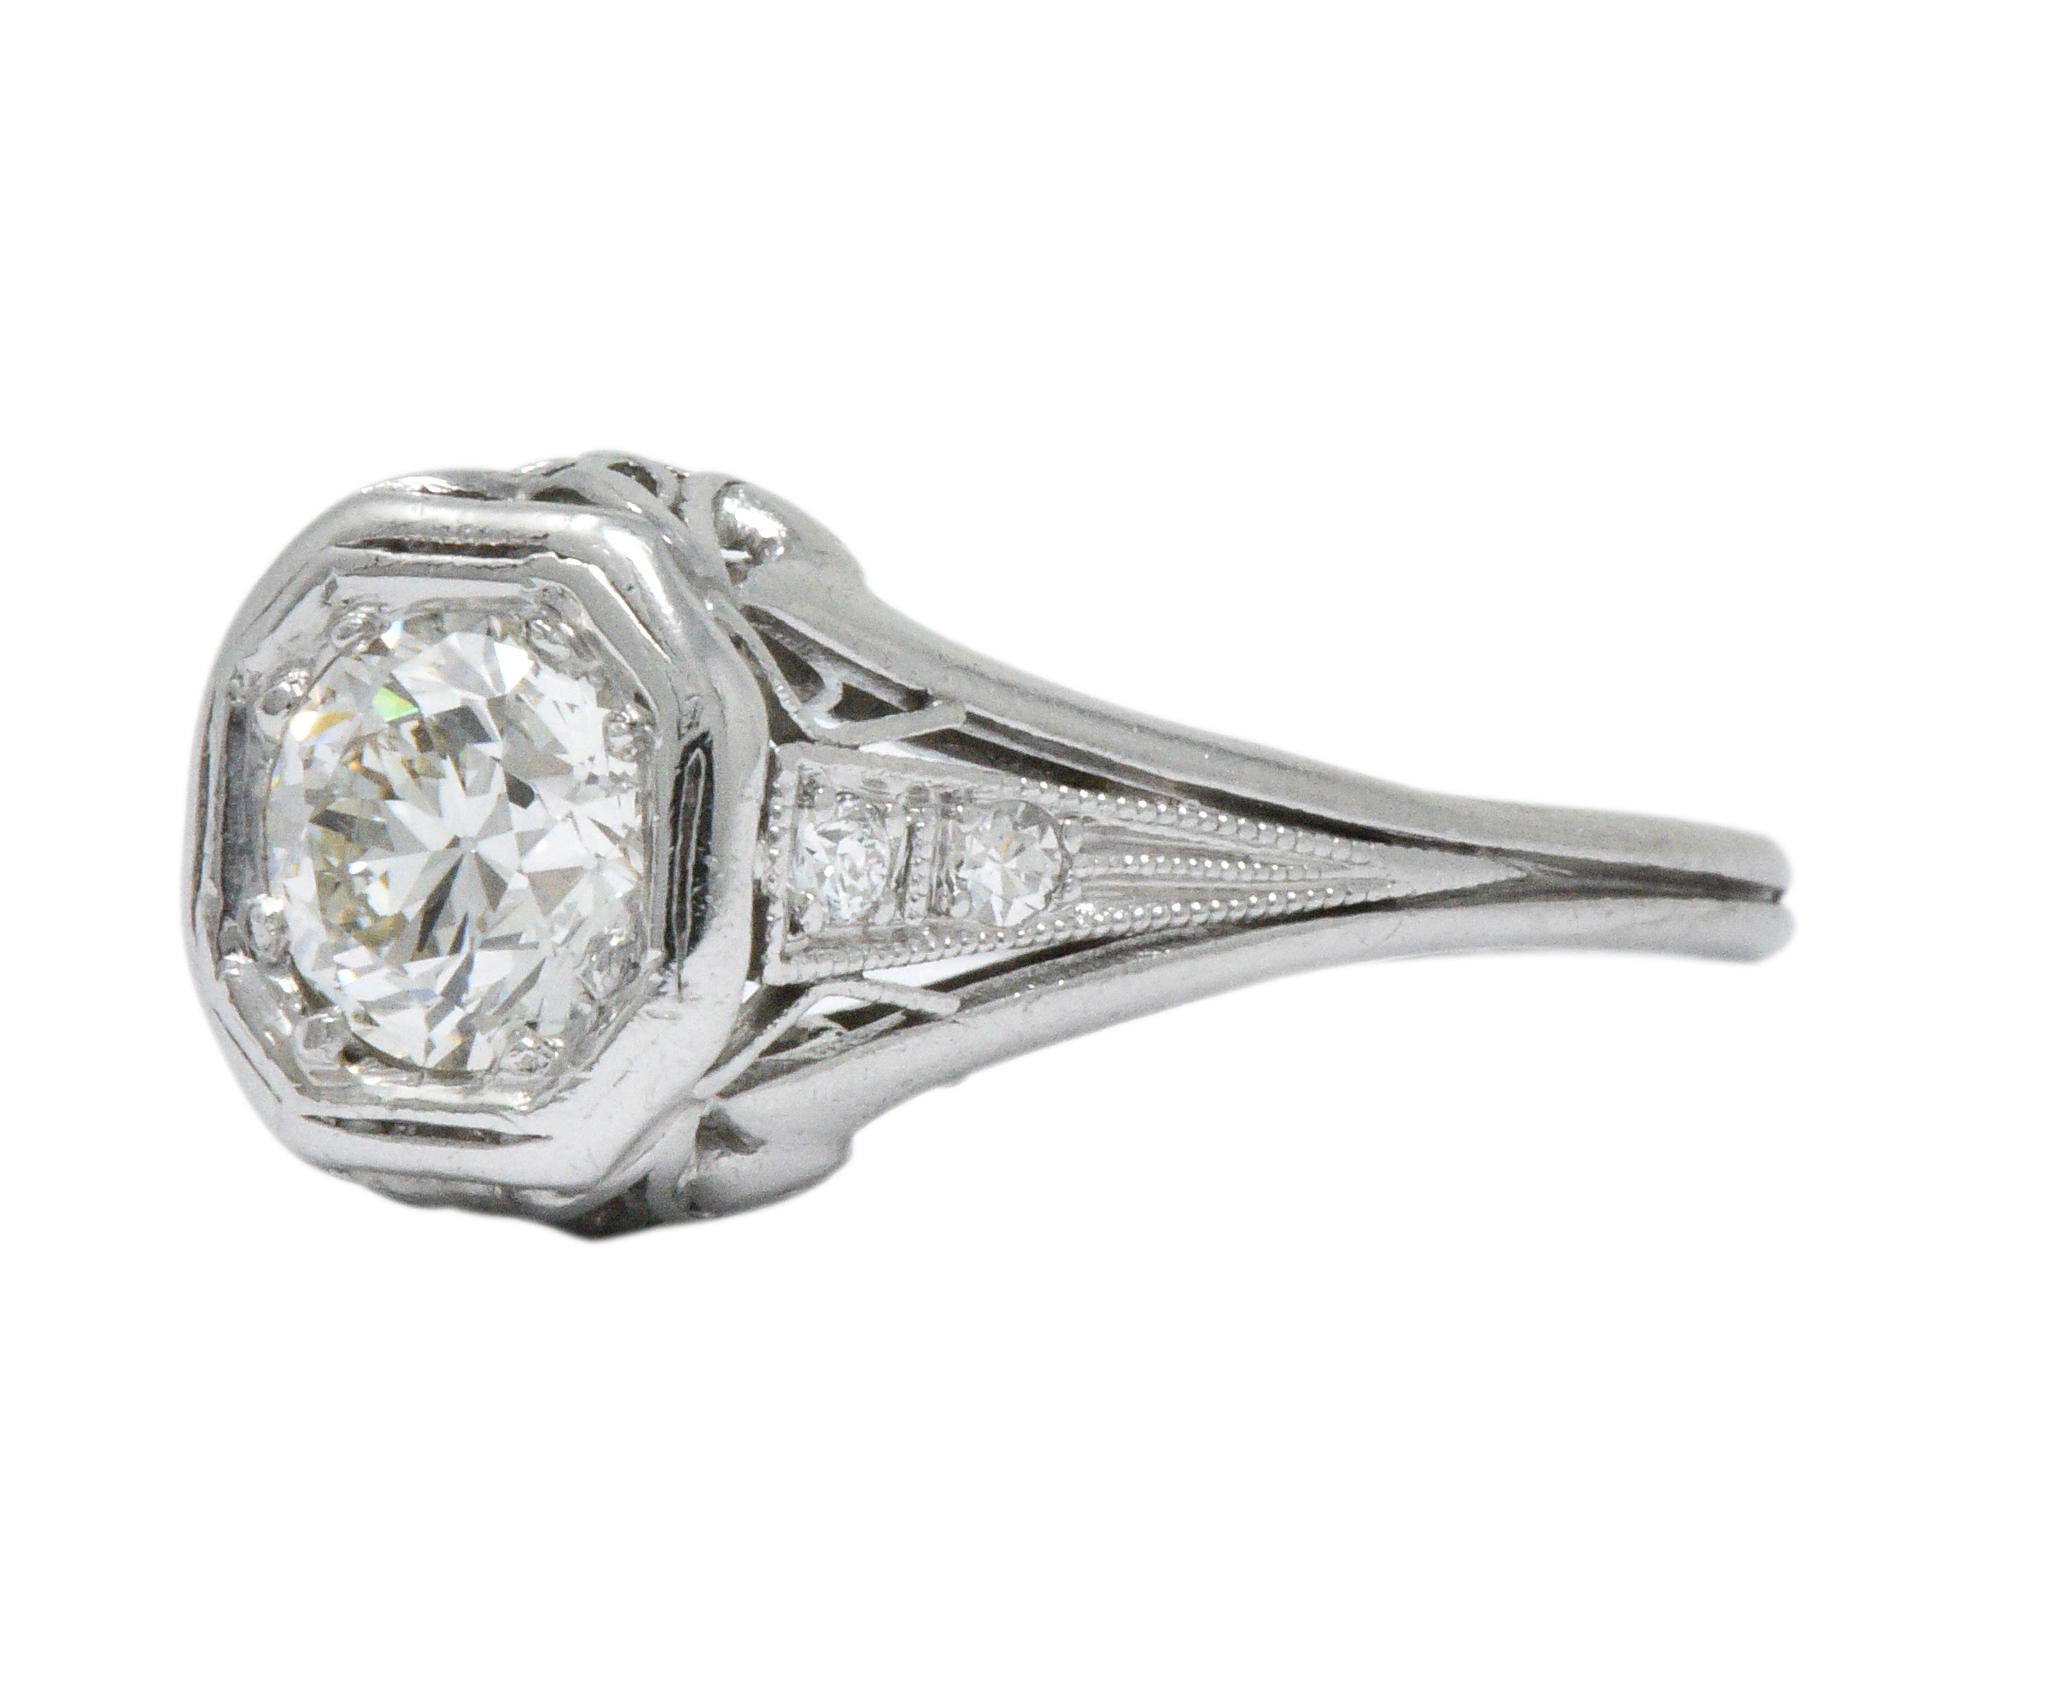 Centering an old European cut diamond weighing 0.68 carats total, J color and VS clarity

Flanked by four round cut diamonds, weighing approximately 0.05 carats total, eye-clean and white

Geometric head with delicately pierced foliate